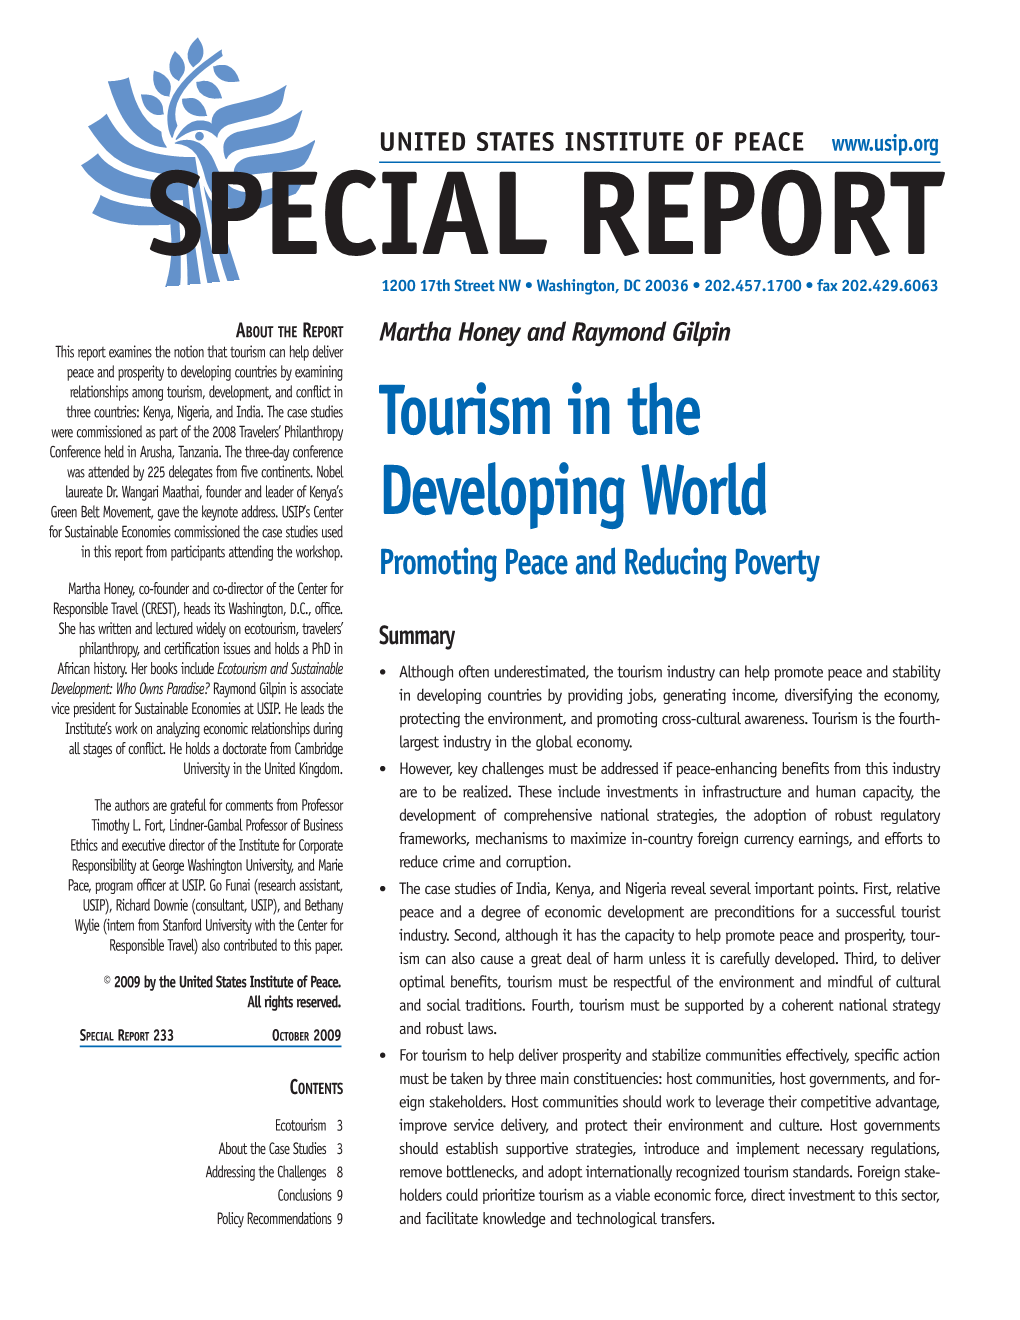 Tourism in the Developing World